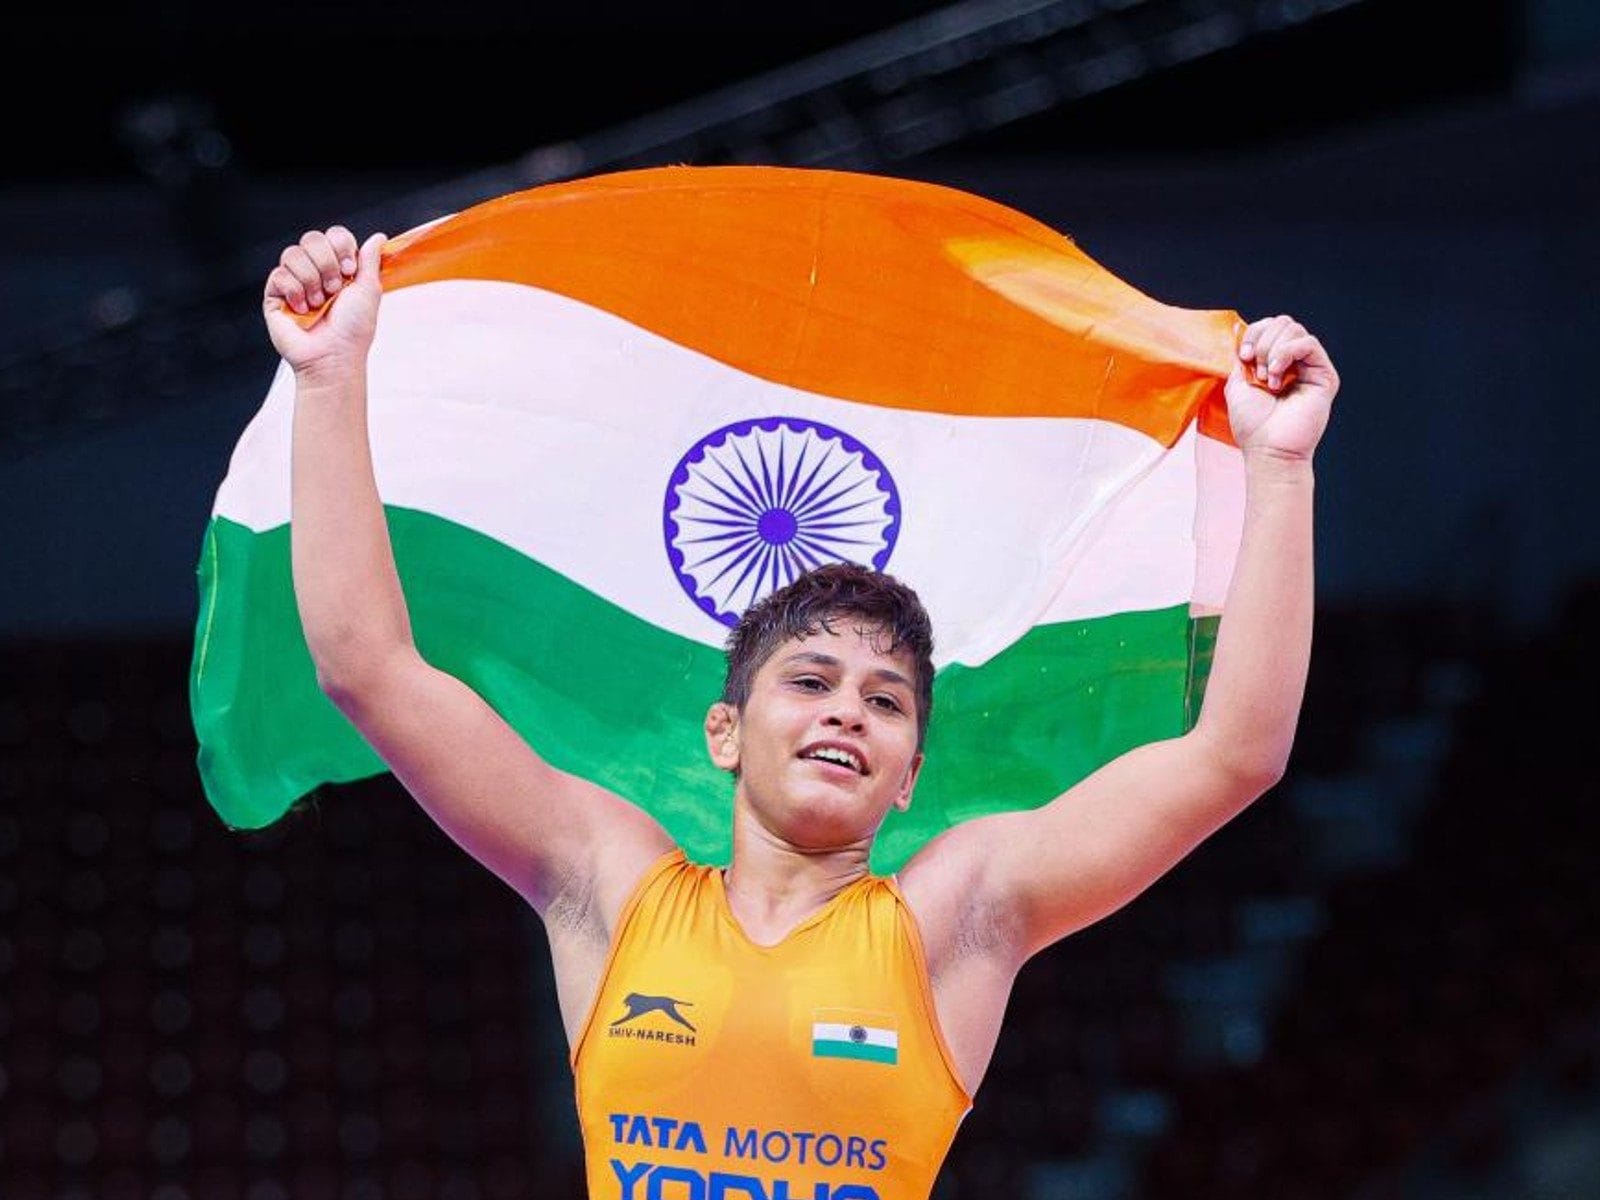 Xxx Porn 16 Hdhindi - 17-Year-Old Antim Becomes First Indian Girl to Win World Junior Wrestling  Gold - News18